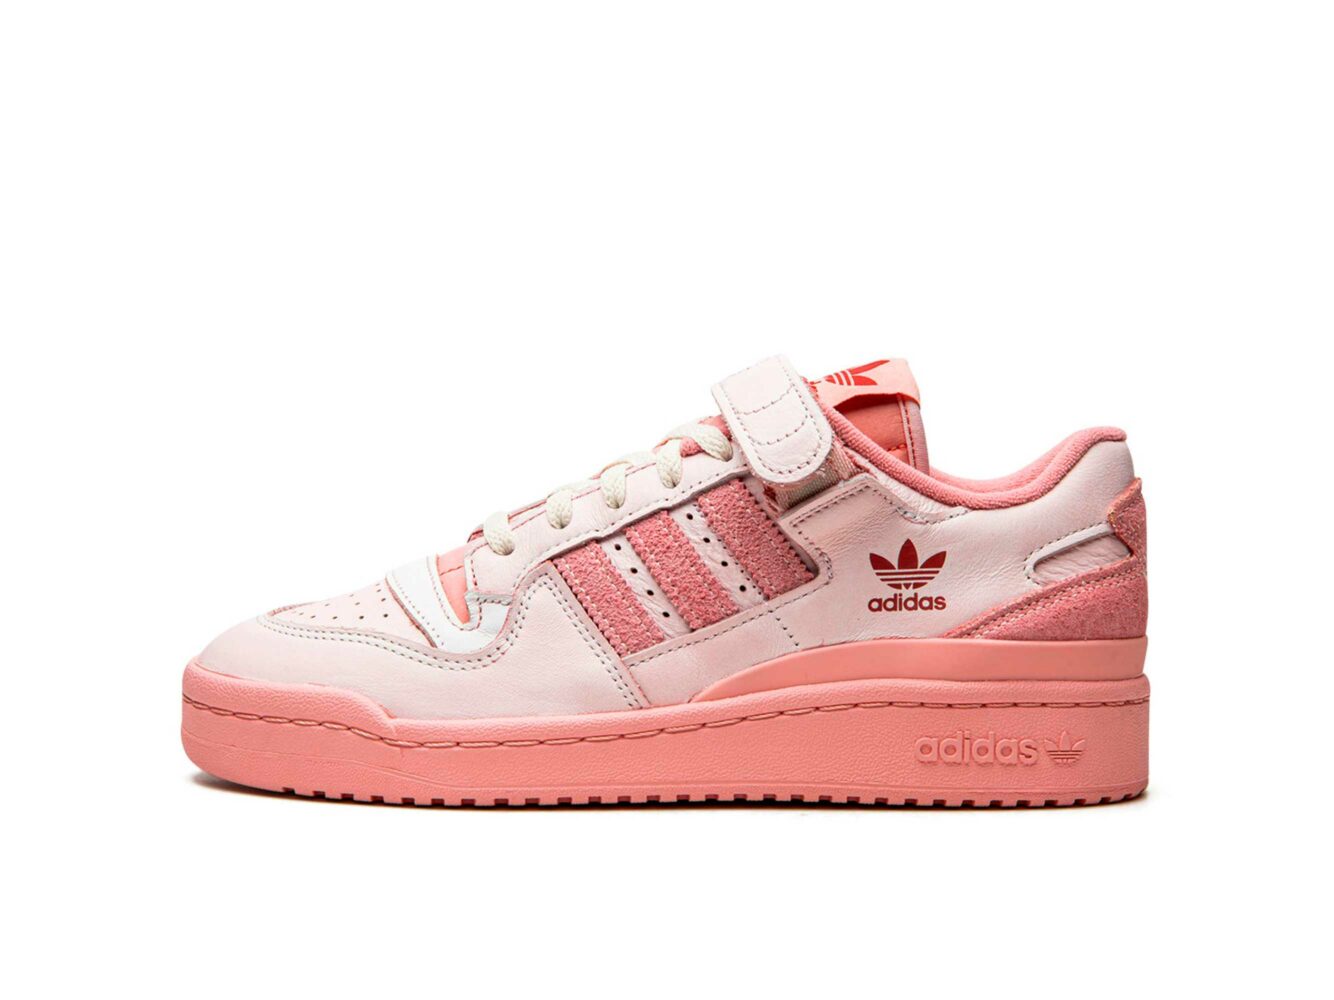 adidas forum buckle low pink at home GY6980 купить